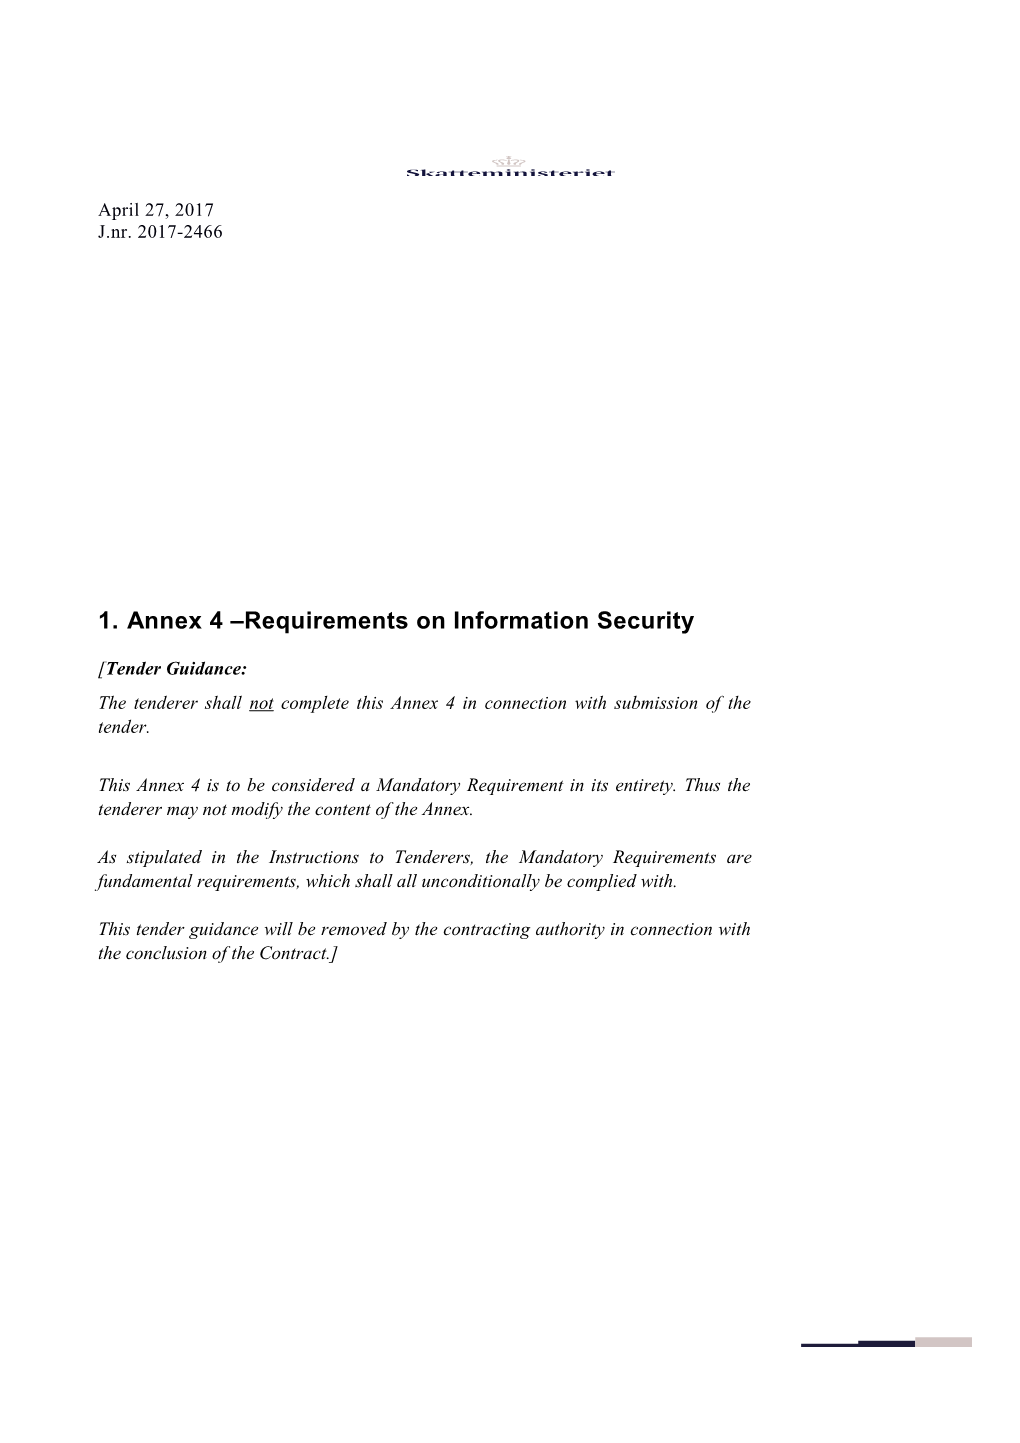 Annex 4 Requirements on Information Security